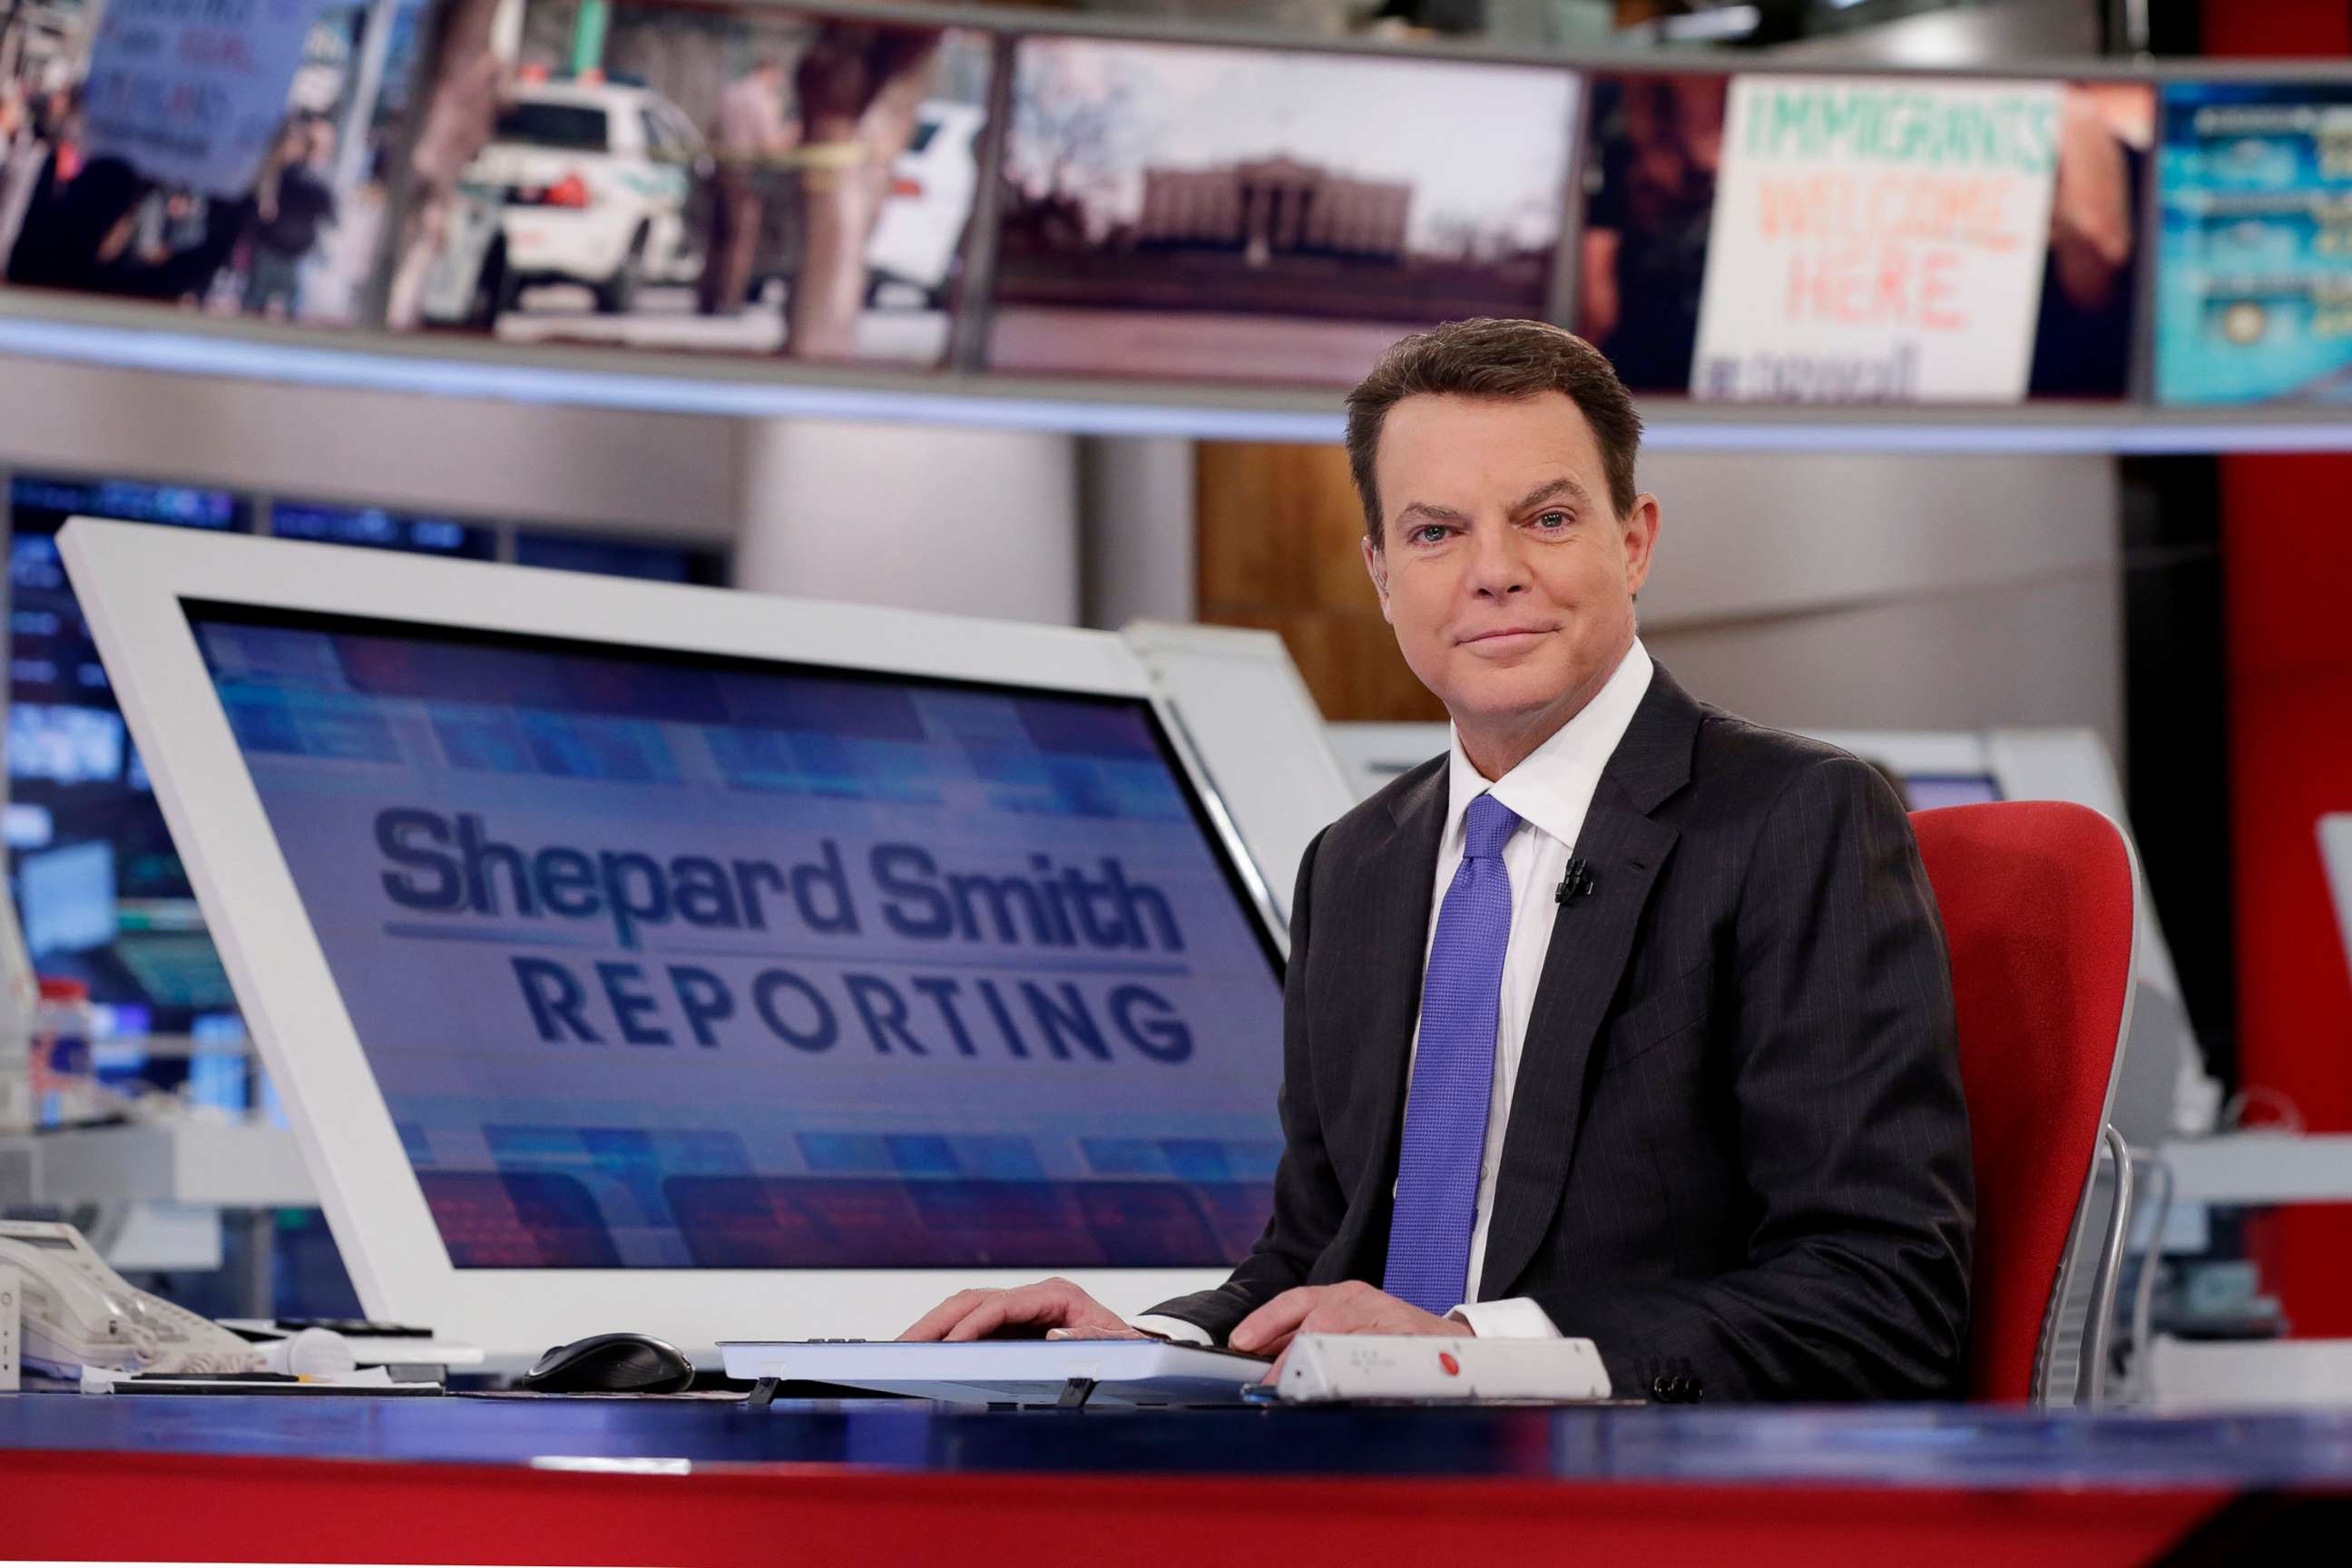 PHOTO: In this Jan. 30, 2017, file photo, Fox News Channel chief news anchor Shepard Smith appears on the set of "Shepard Smith Reporting" in New York.